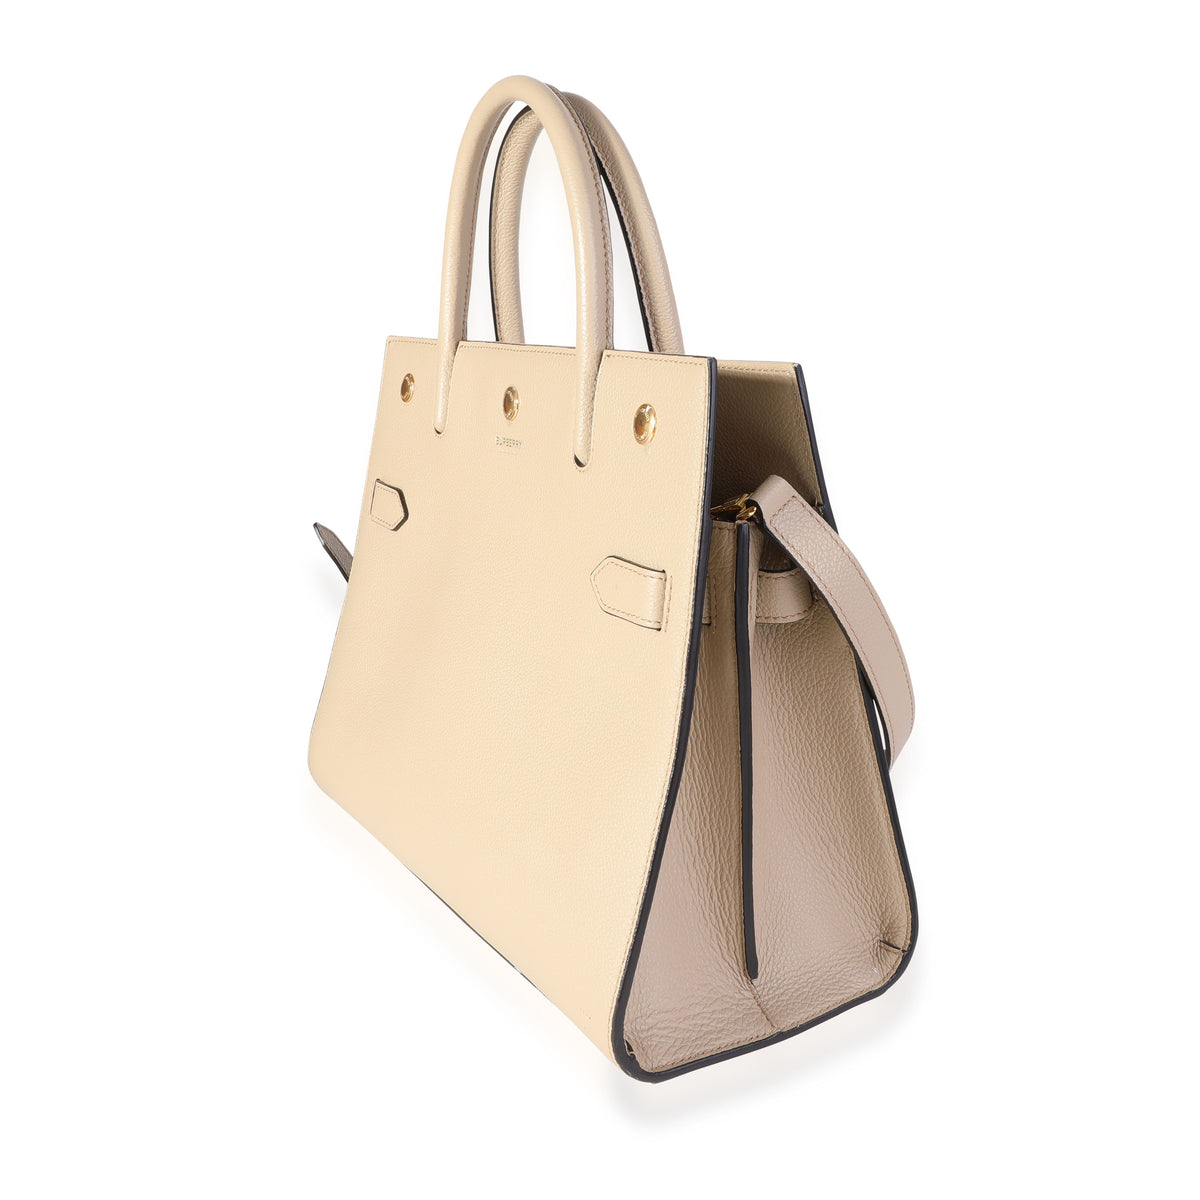 Burberry Small Title Leather Tote Bag Beige